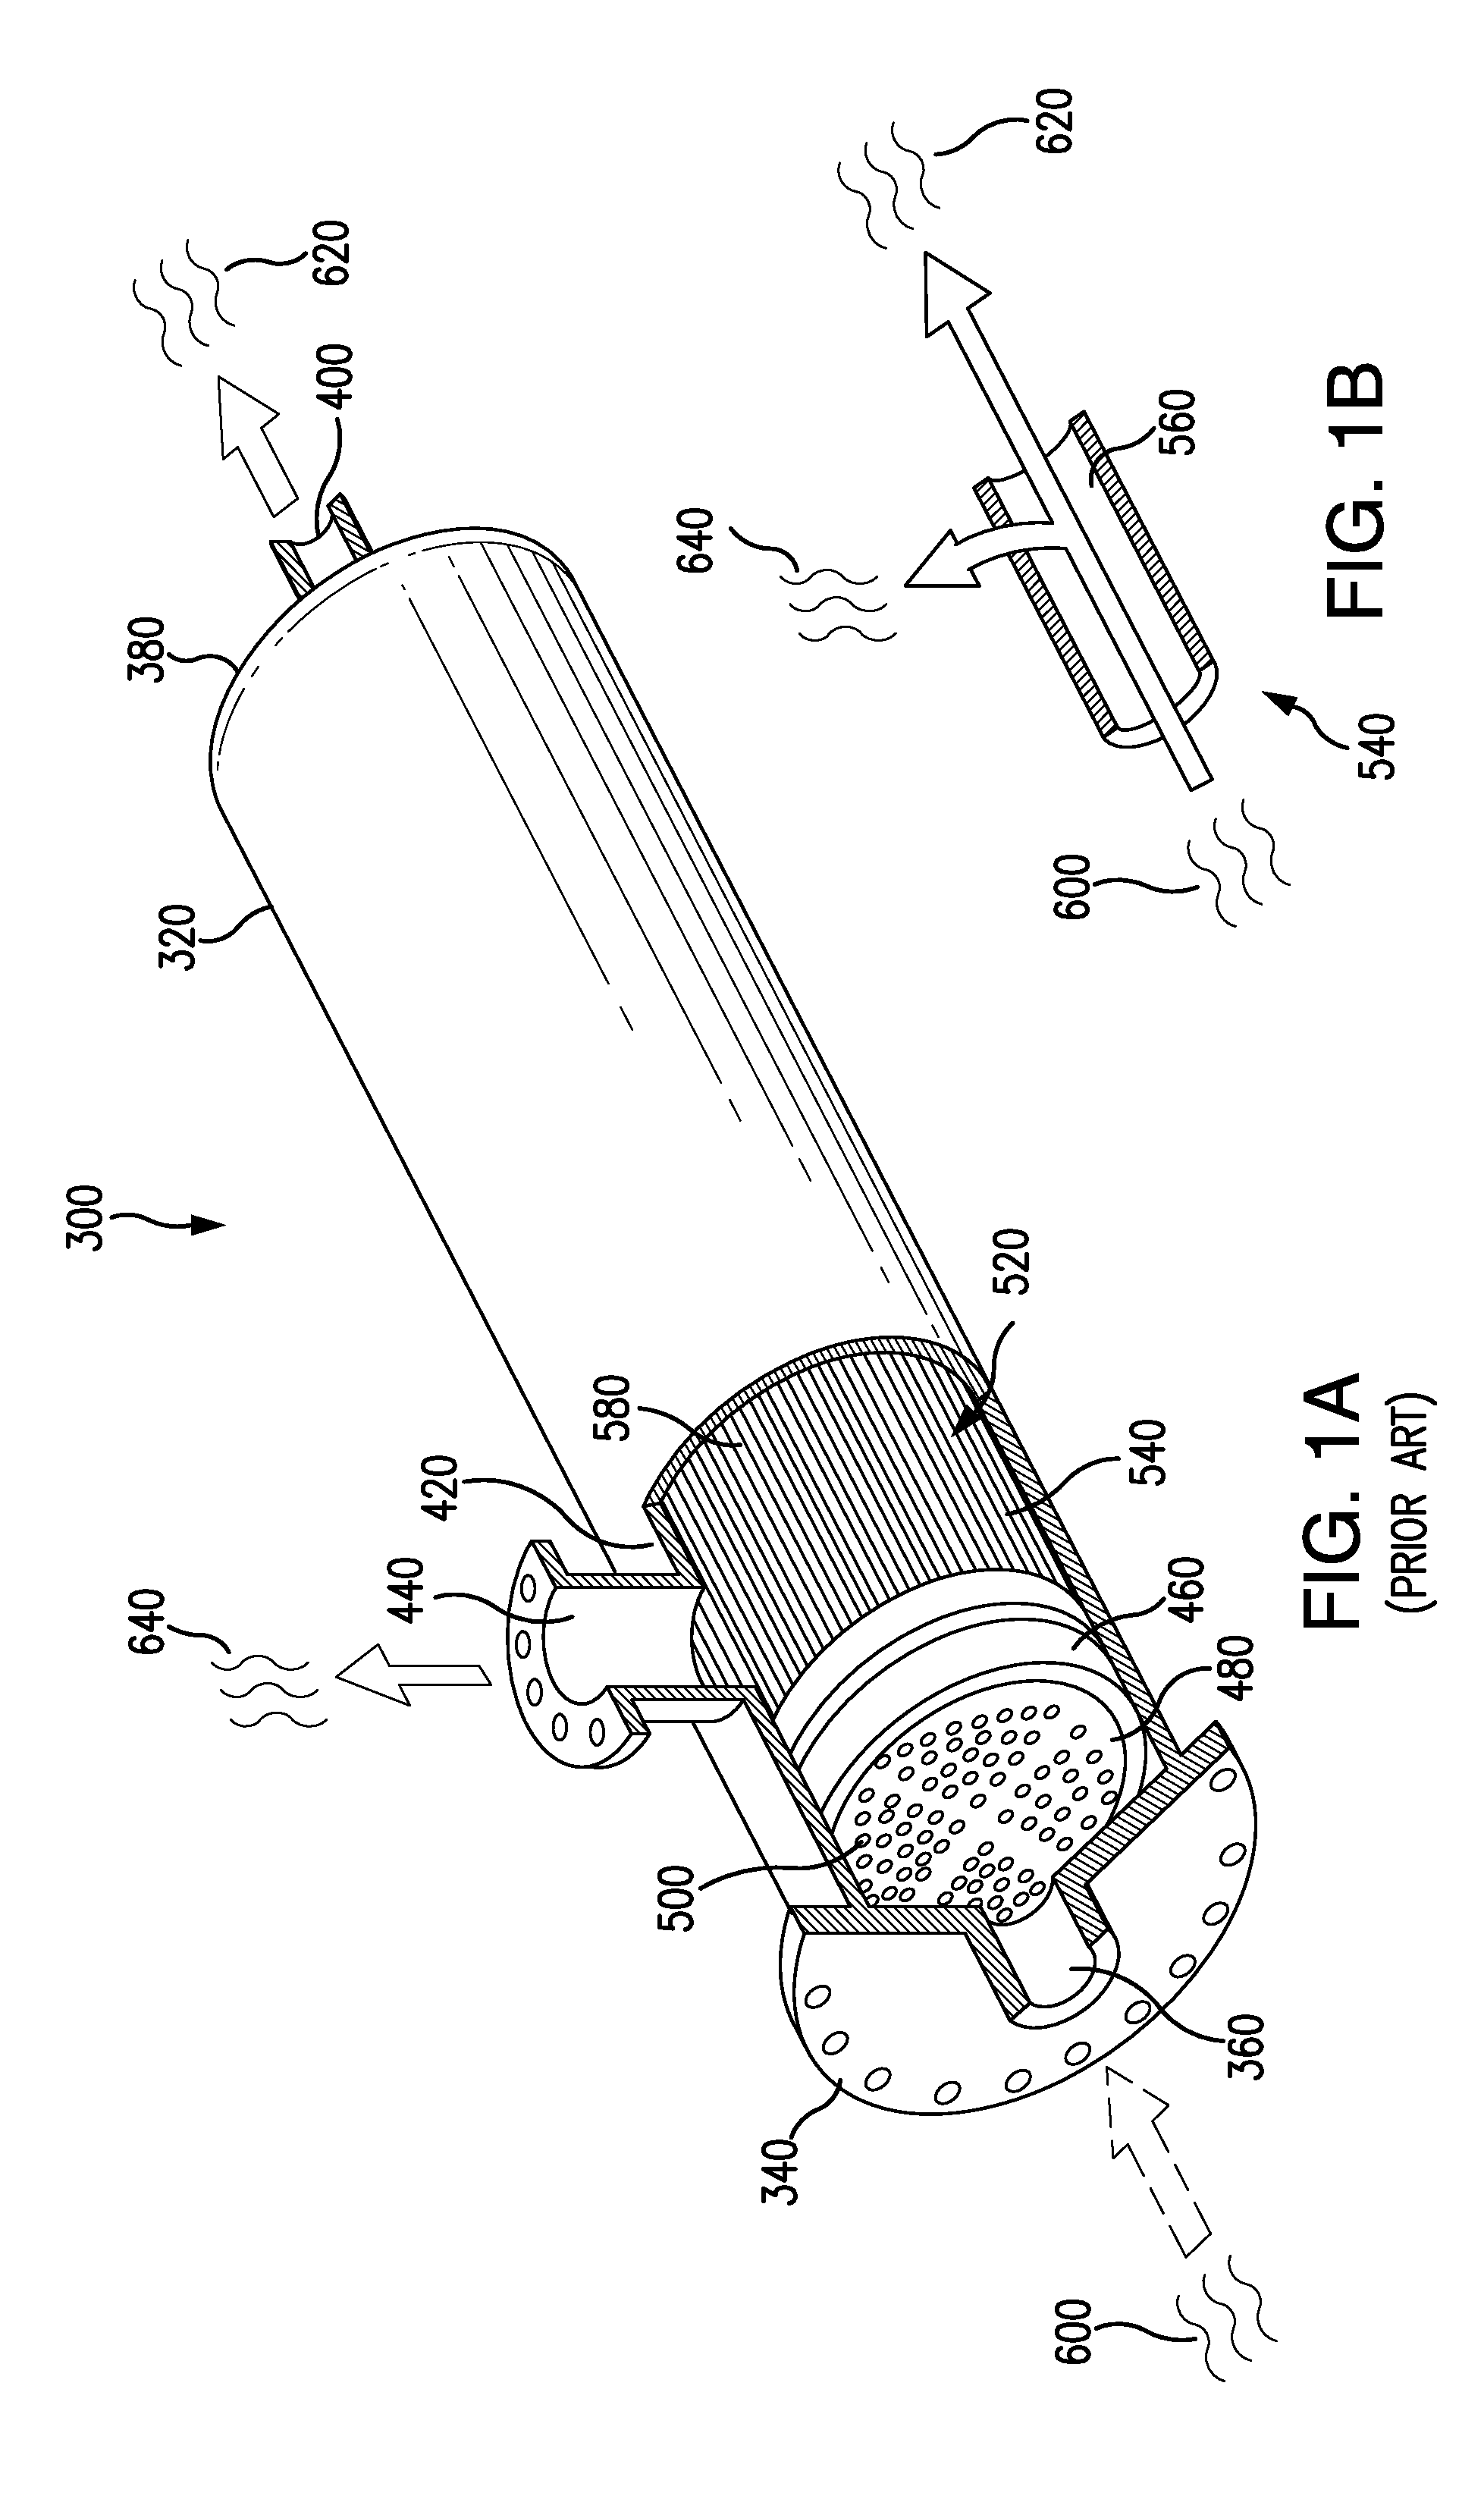 Hollow fiber apparatus and use thereof for fluids separations and heat and mass transfers